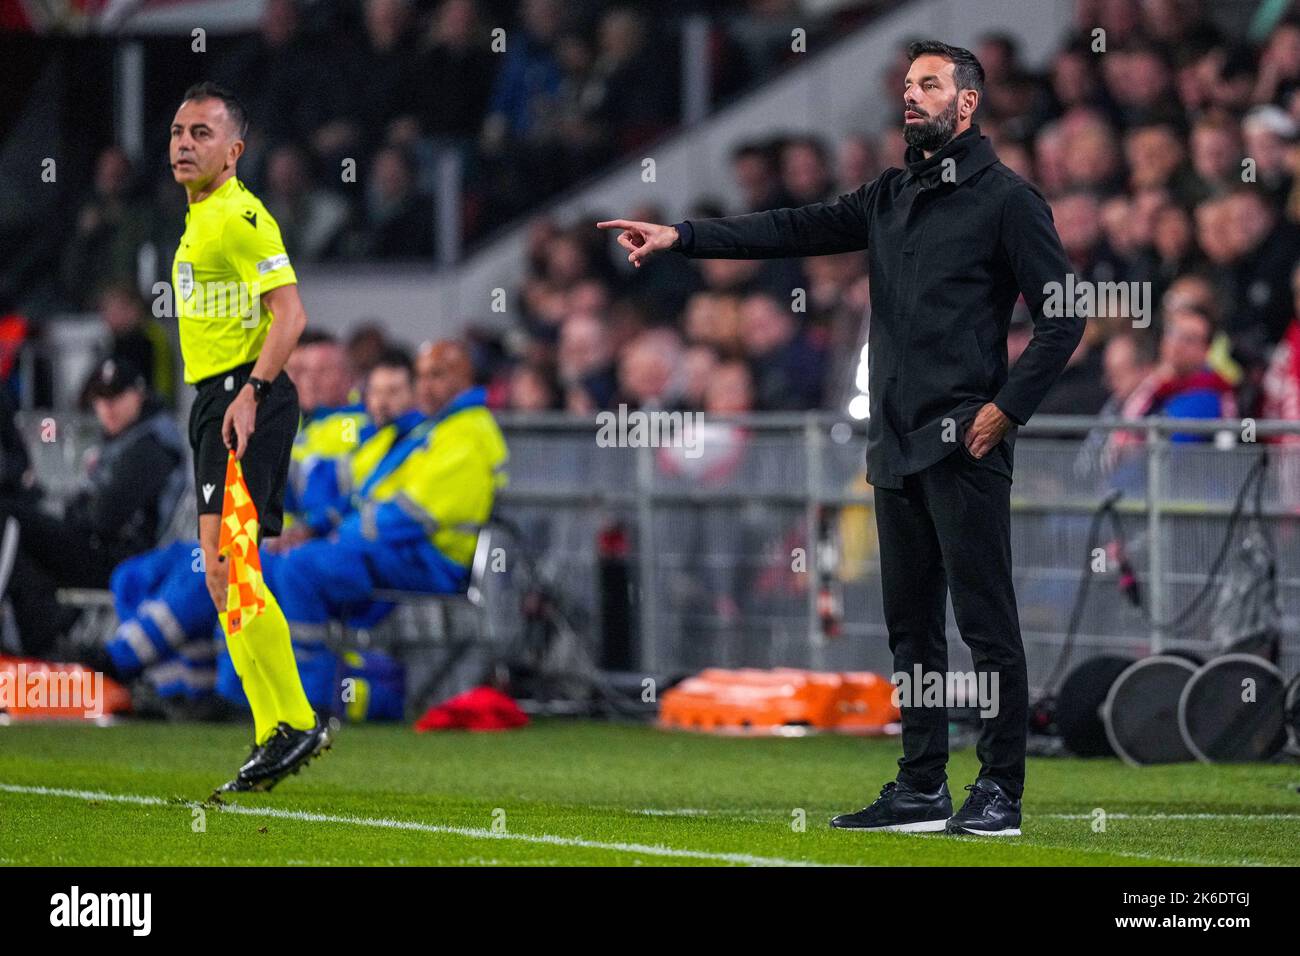 EINDHOVEN, NETHERLANDS - OCTOBER 13: Head Coach Ruud van Nistelrooy of PSV Eindhoven during the UEFA Europa League match between PSV Eindhoven and FC Zurich at Philips Stadion on October 13, 2022 in Eindhoven, Netherlands (Photo by Geert van Erven/Orange Pictures) Stock Photo